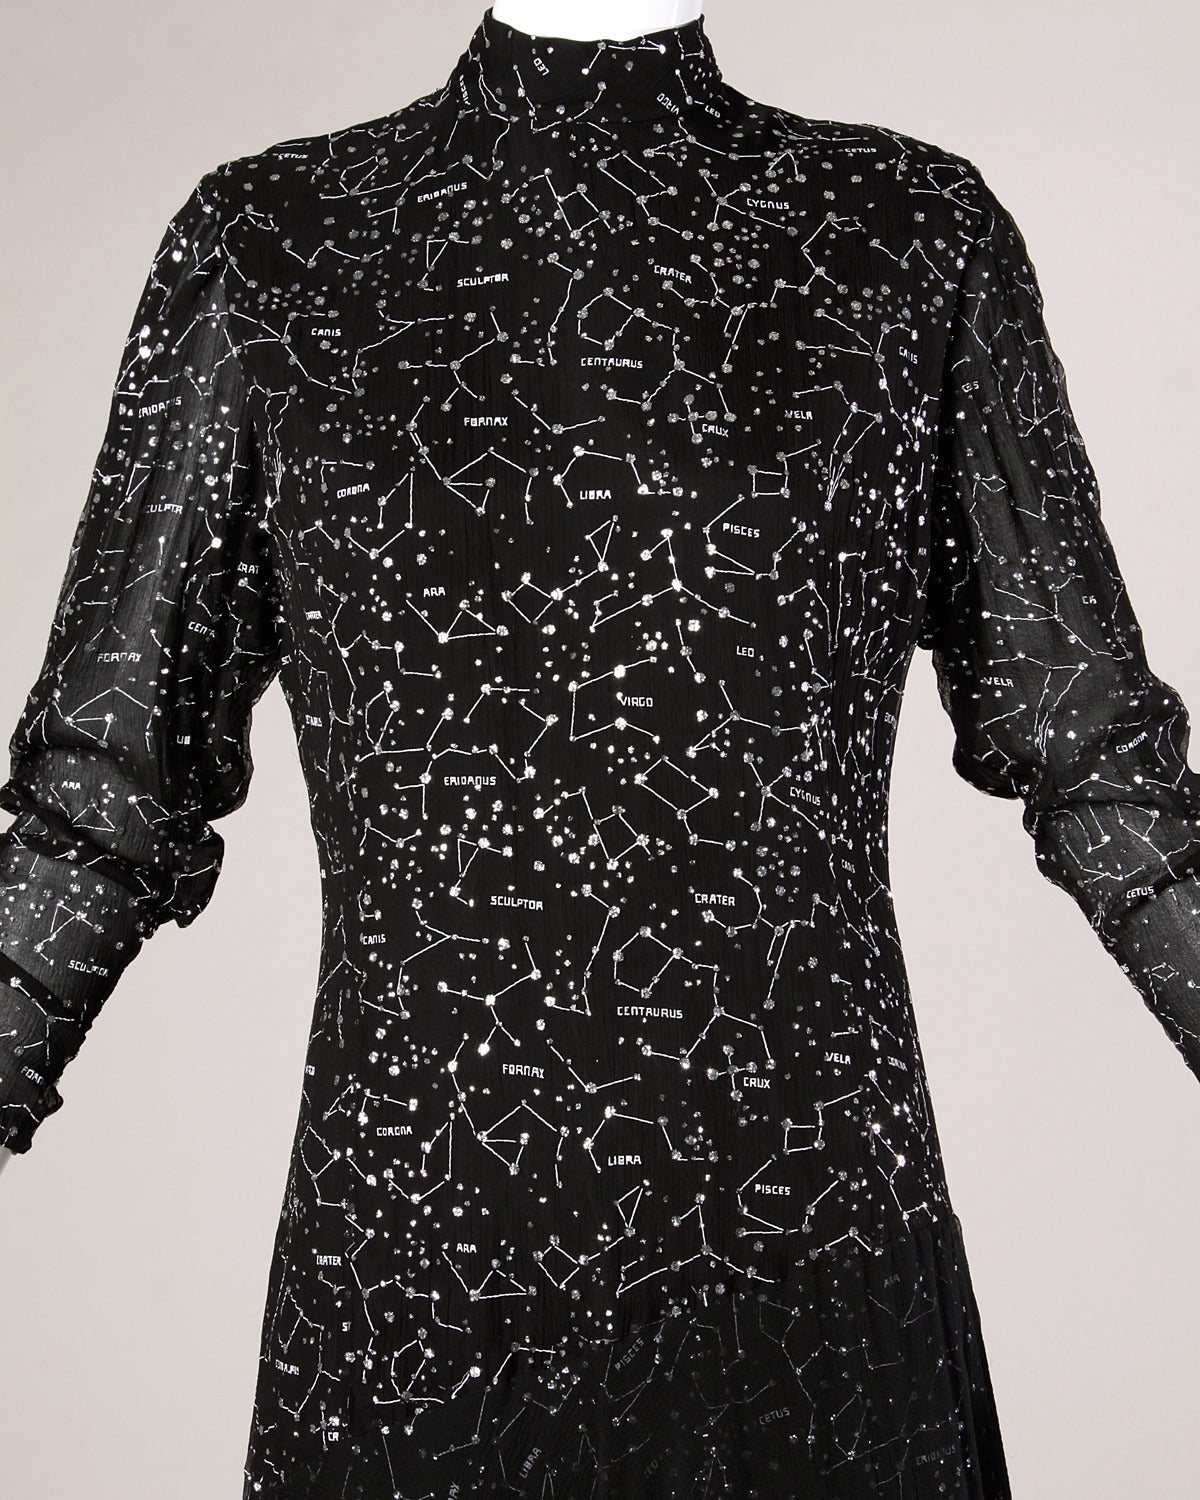 Libra, Pisces, Centaurus, Crater, Leo, Virgo, Cetus and Canis are just a few of the constellations labelled on this silk chiffon Hanae Mori formal gown. This dress is literally a map of the stars in glittery metallic silver. Asymmetric hemline and